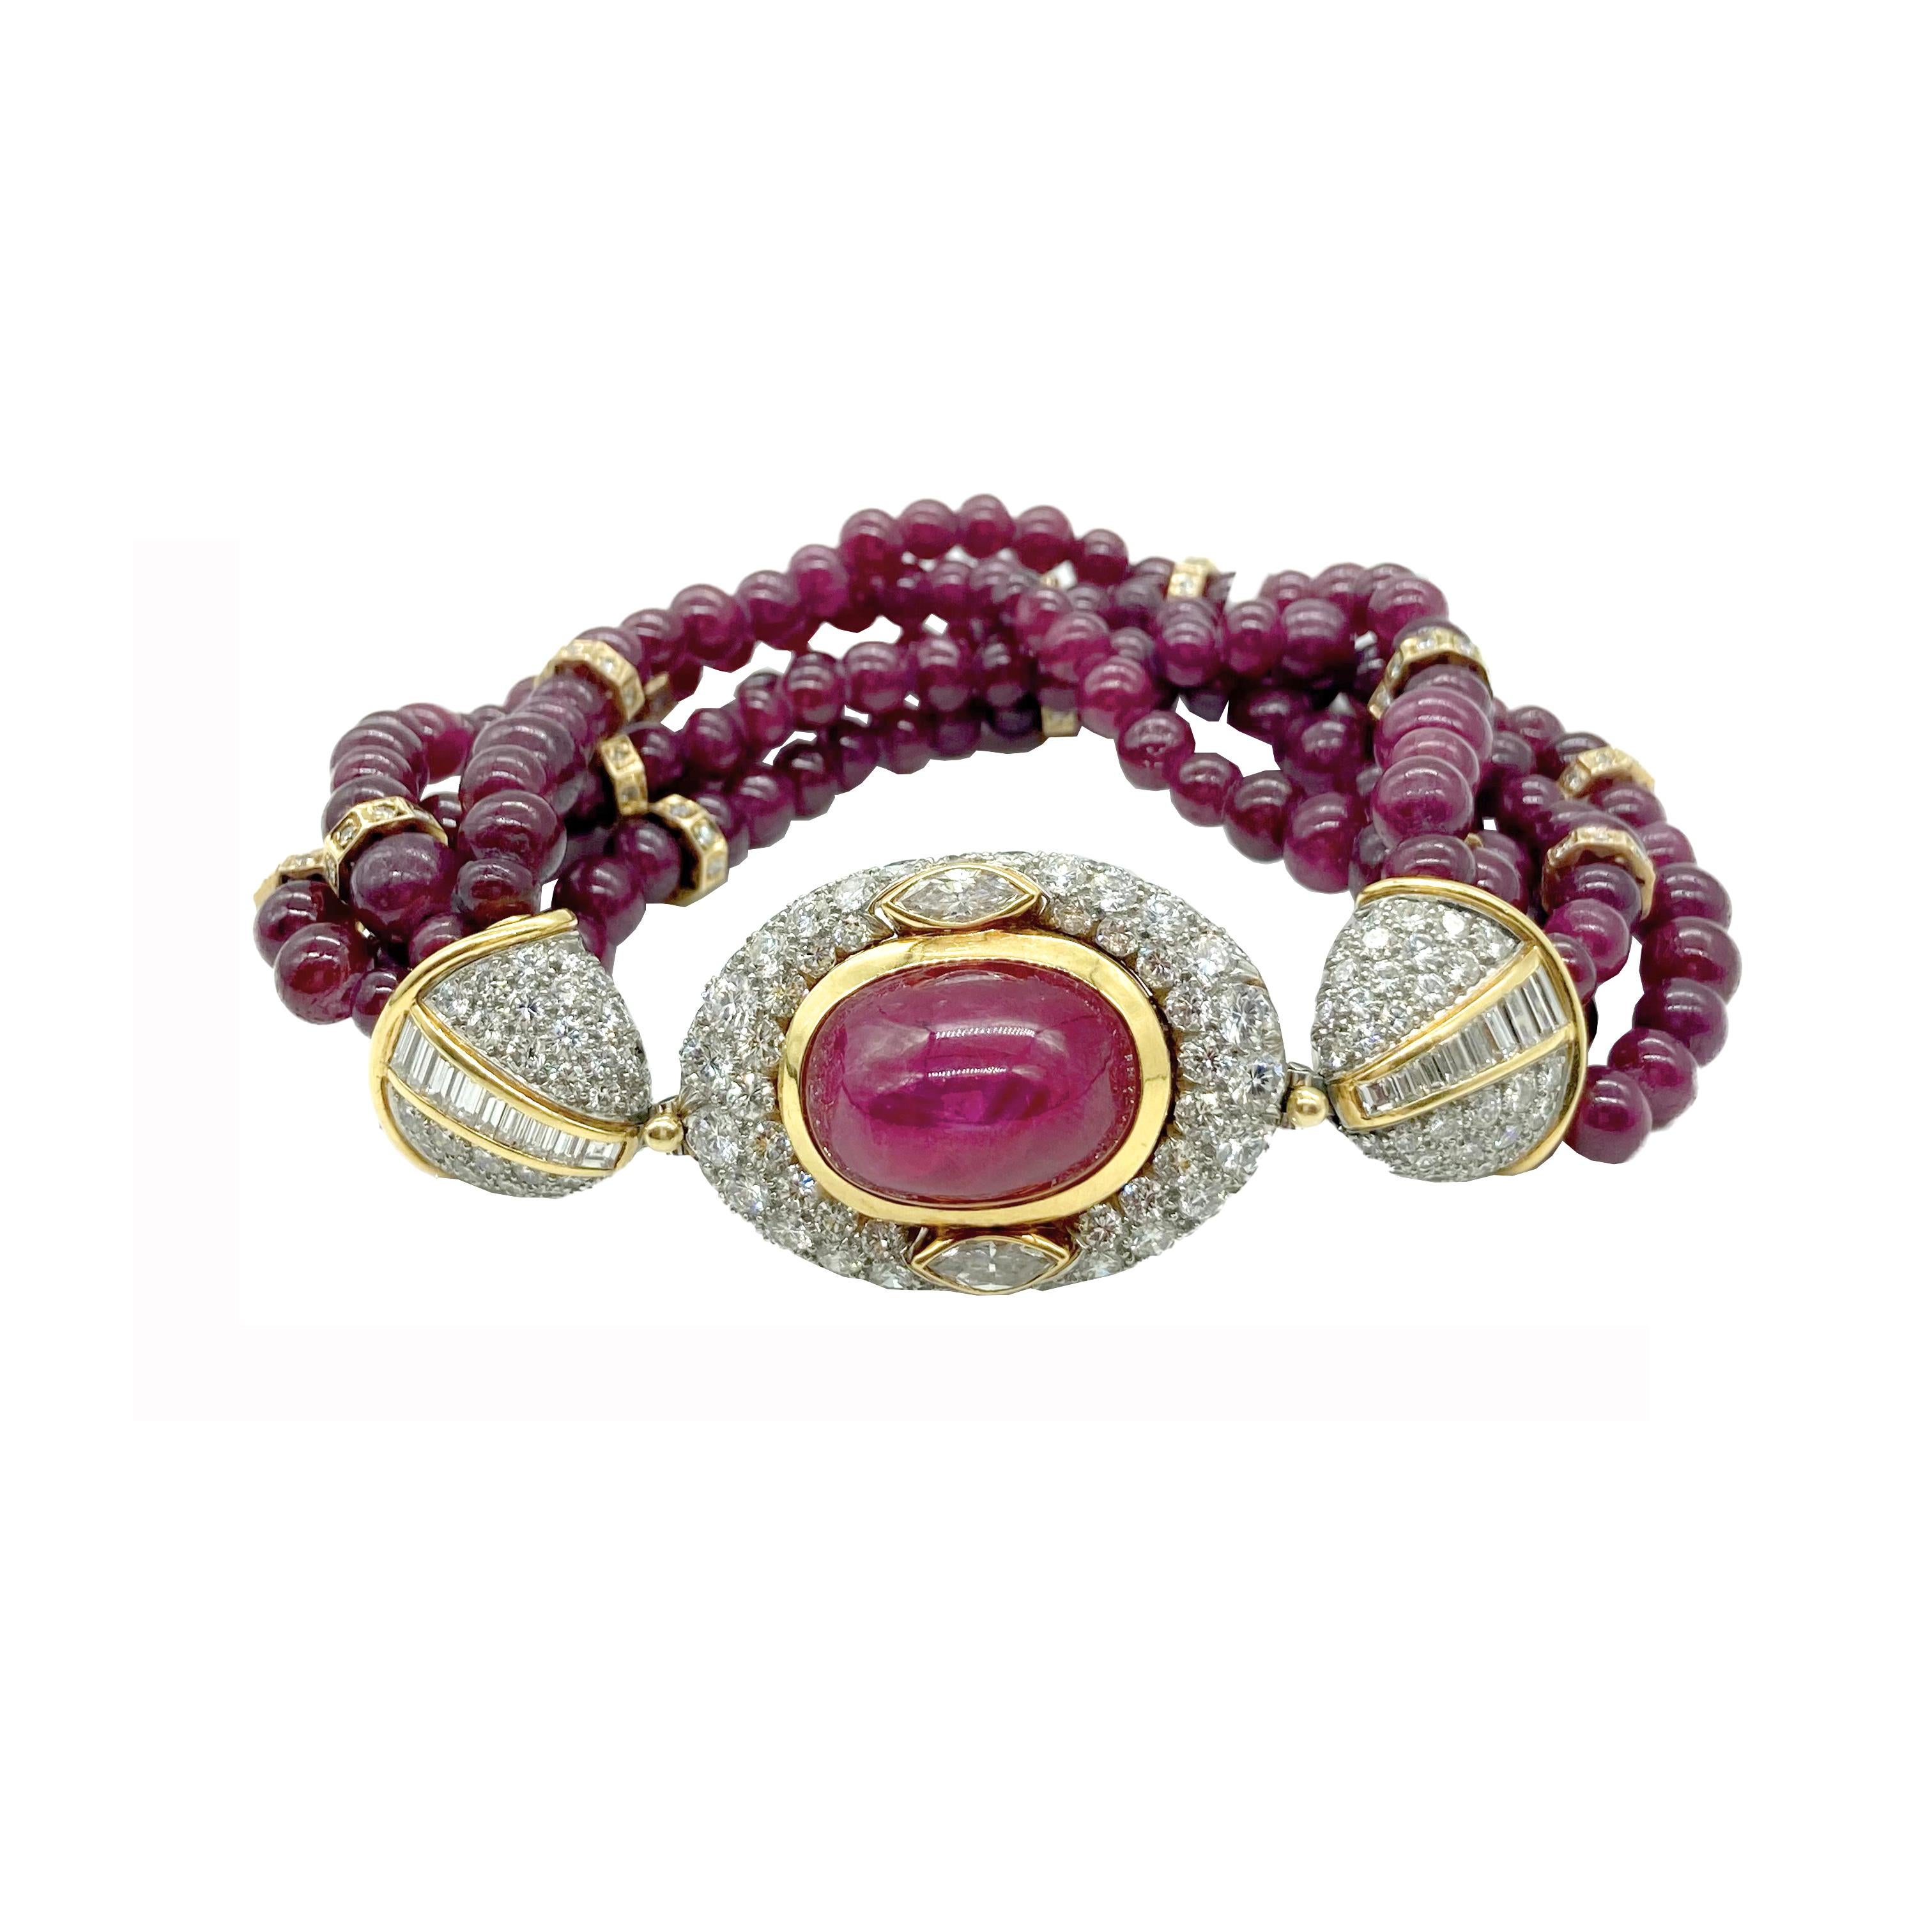 A glamorous Bulgari torsade bracelet centering a cabochon Burmese ruby embellished by diamonds, with a body of ruby beads. in 18 karat yellow gold and platinum. Circa 1980s. Made in Italy.